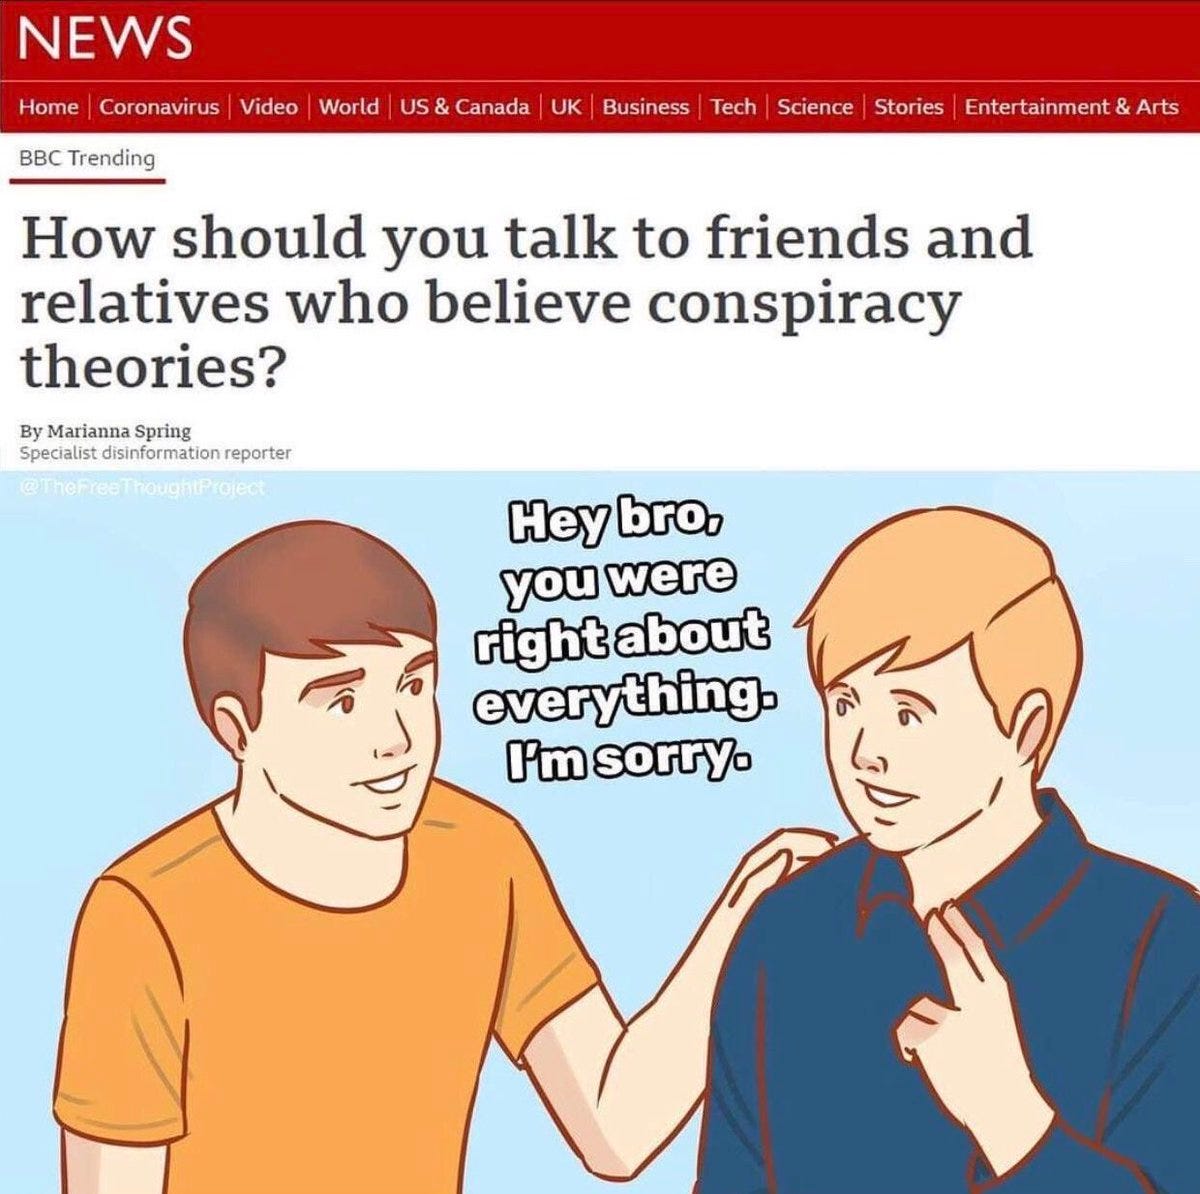 MIT Technology Review on Twitter: &quot;Here&#39;s how to talk to friends and family  who believe in conspiracy theories. https://t.co/grFNDYmq29&quot; / Twitter